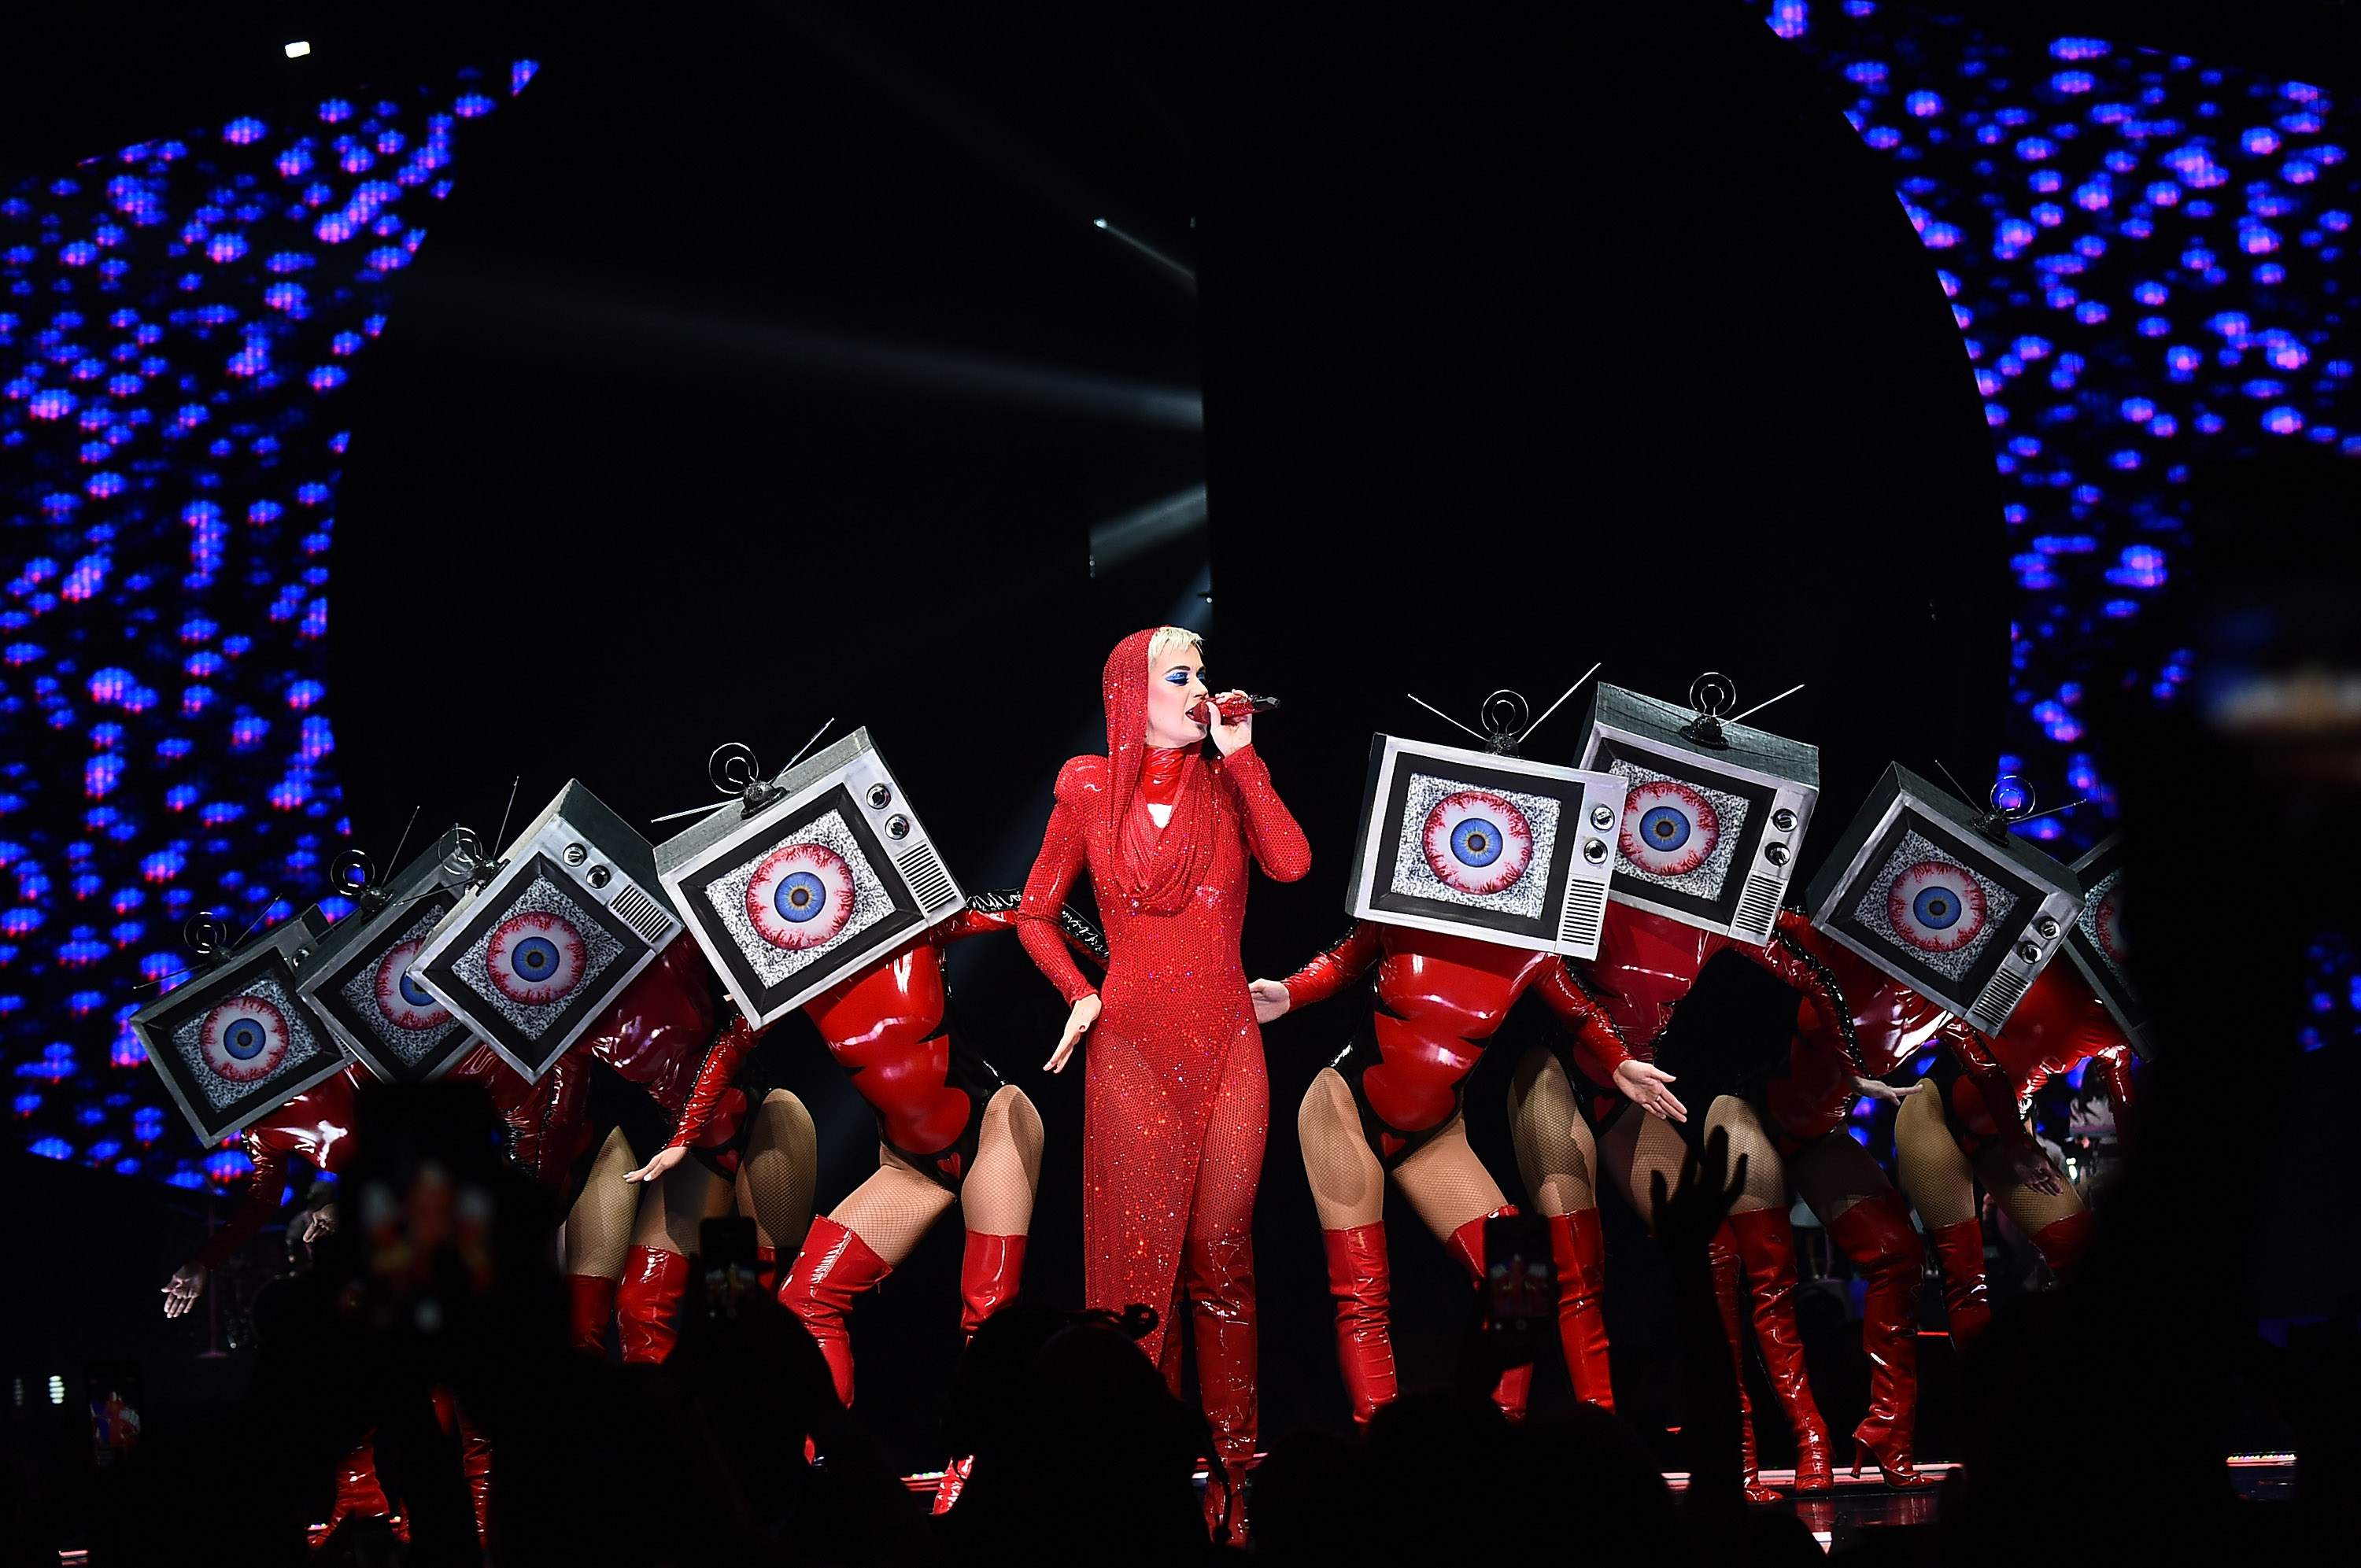 NEW YORK, NY - OCTOBER 02:  Katy Perry performs onstage at Madison Square Garden on October 2, 2017 in New York City.  (Photo by Michael Loccisano/Getty Images) (Michael Loccisano&mdash;Getty Images)